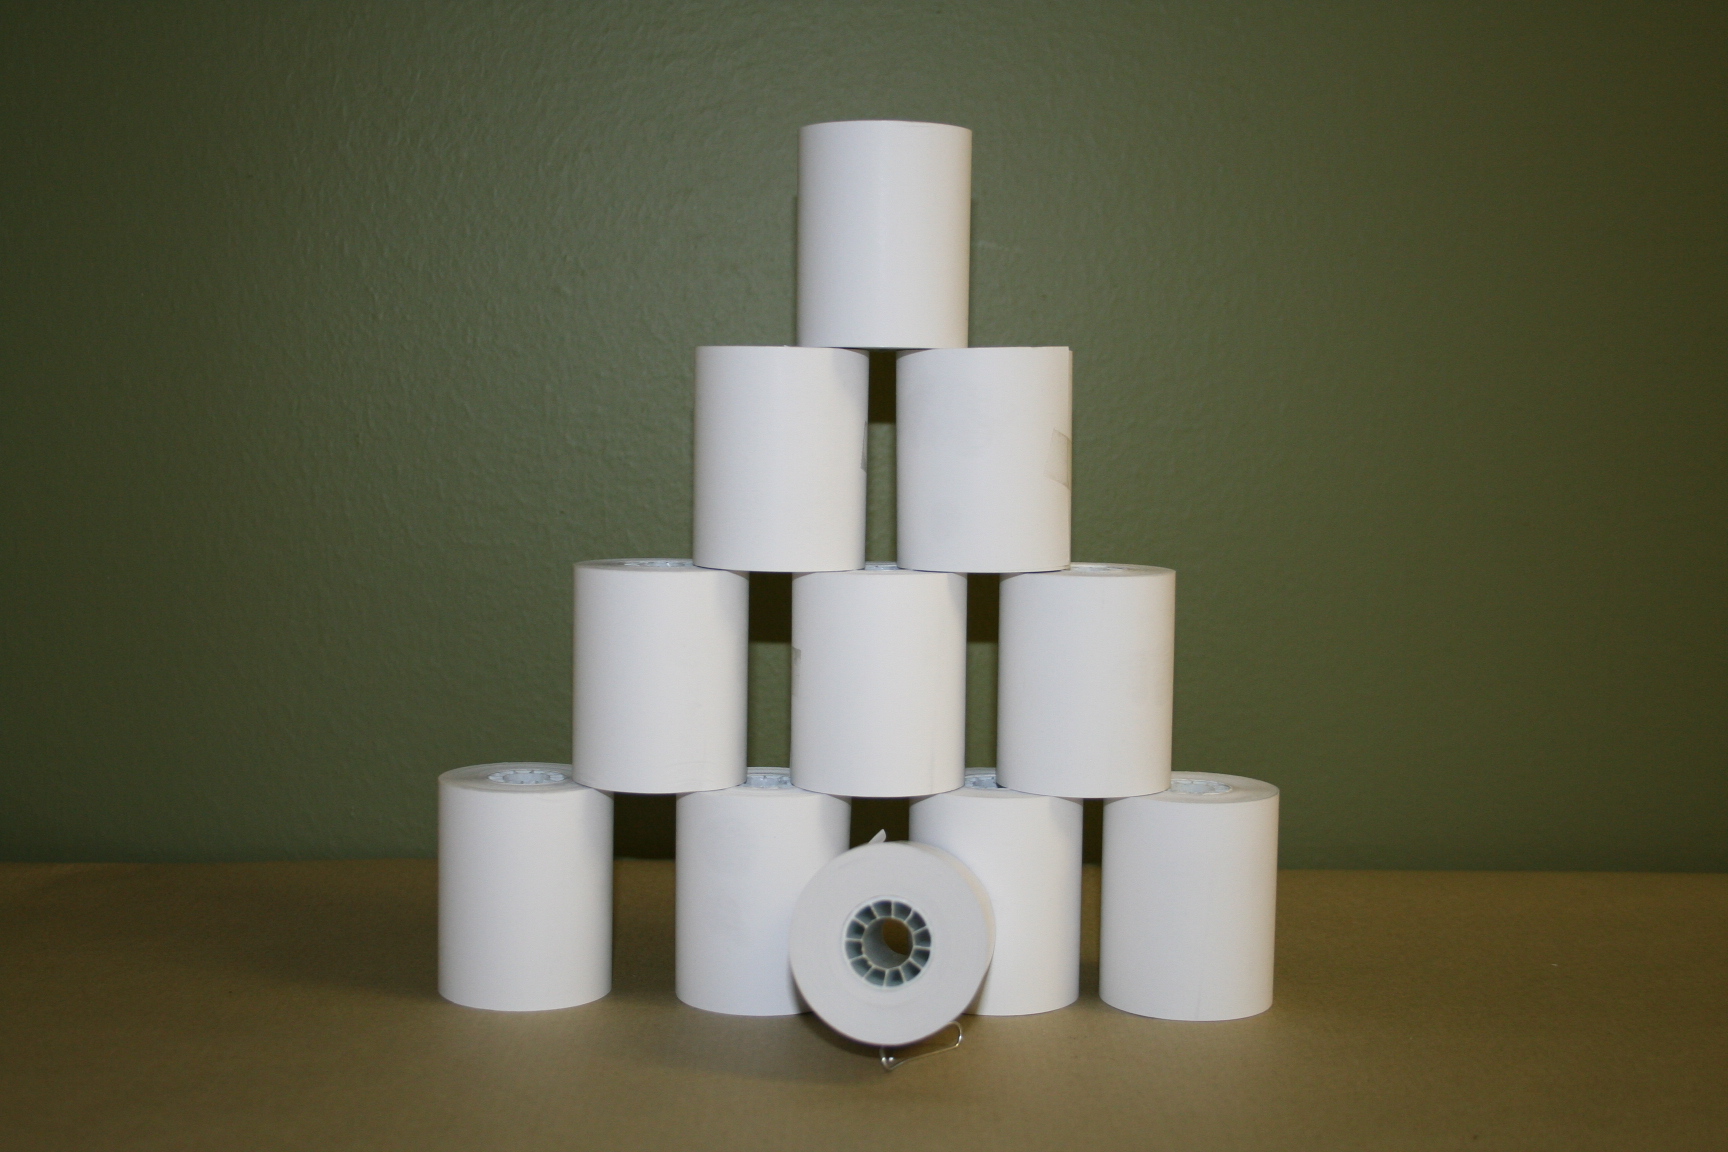 2 1/4” x 85’ BPA Free Thermal Credit Card Rolls-Zone #1 - Click Image to Close